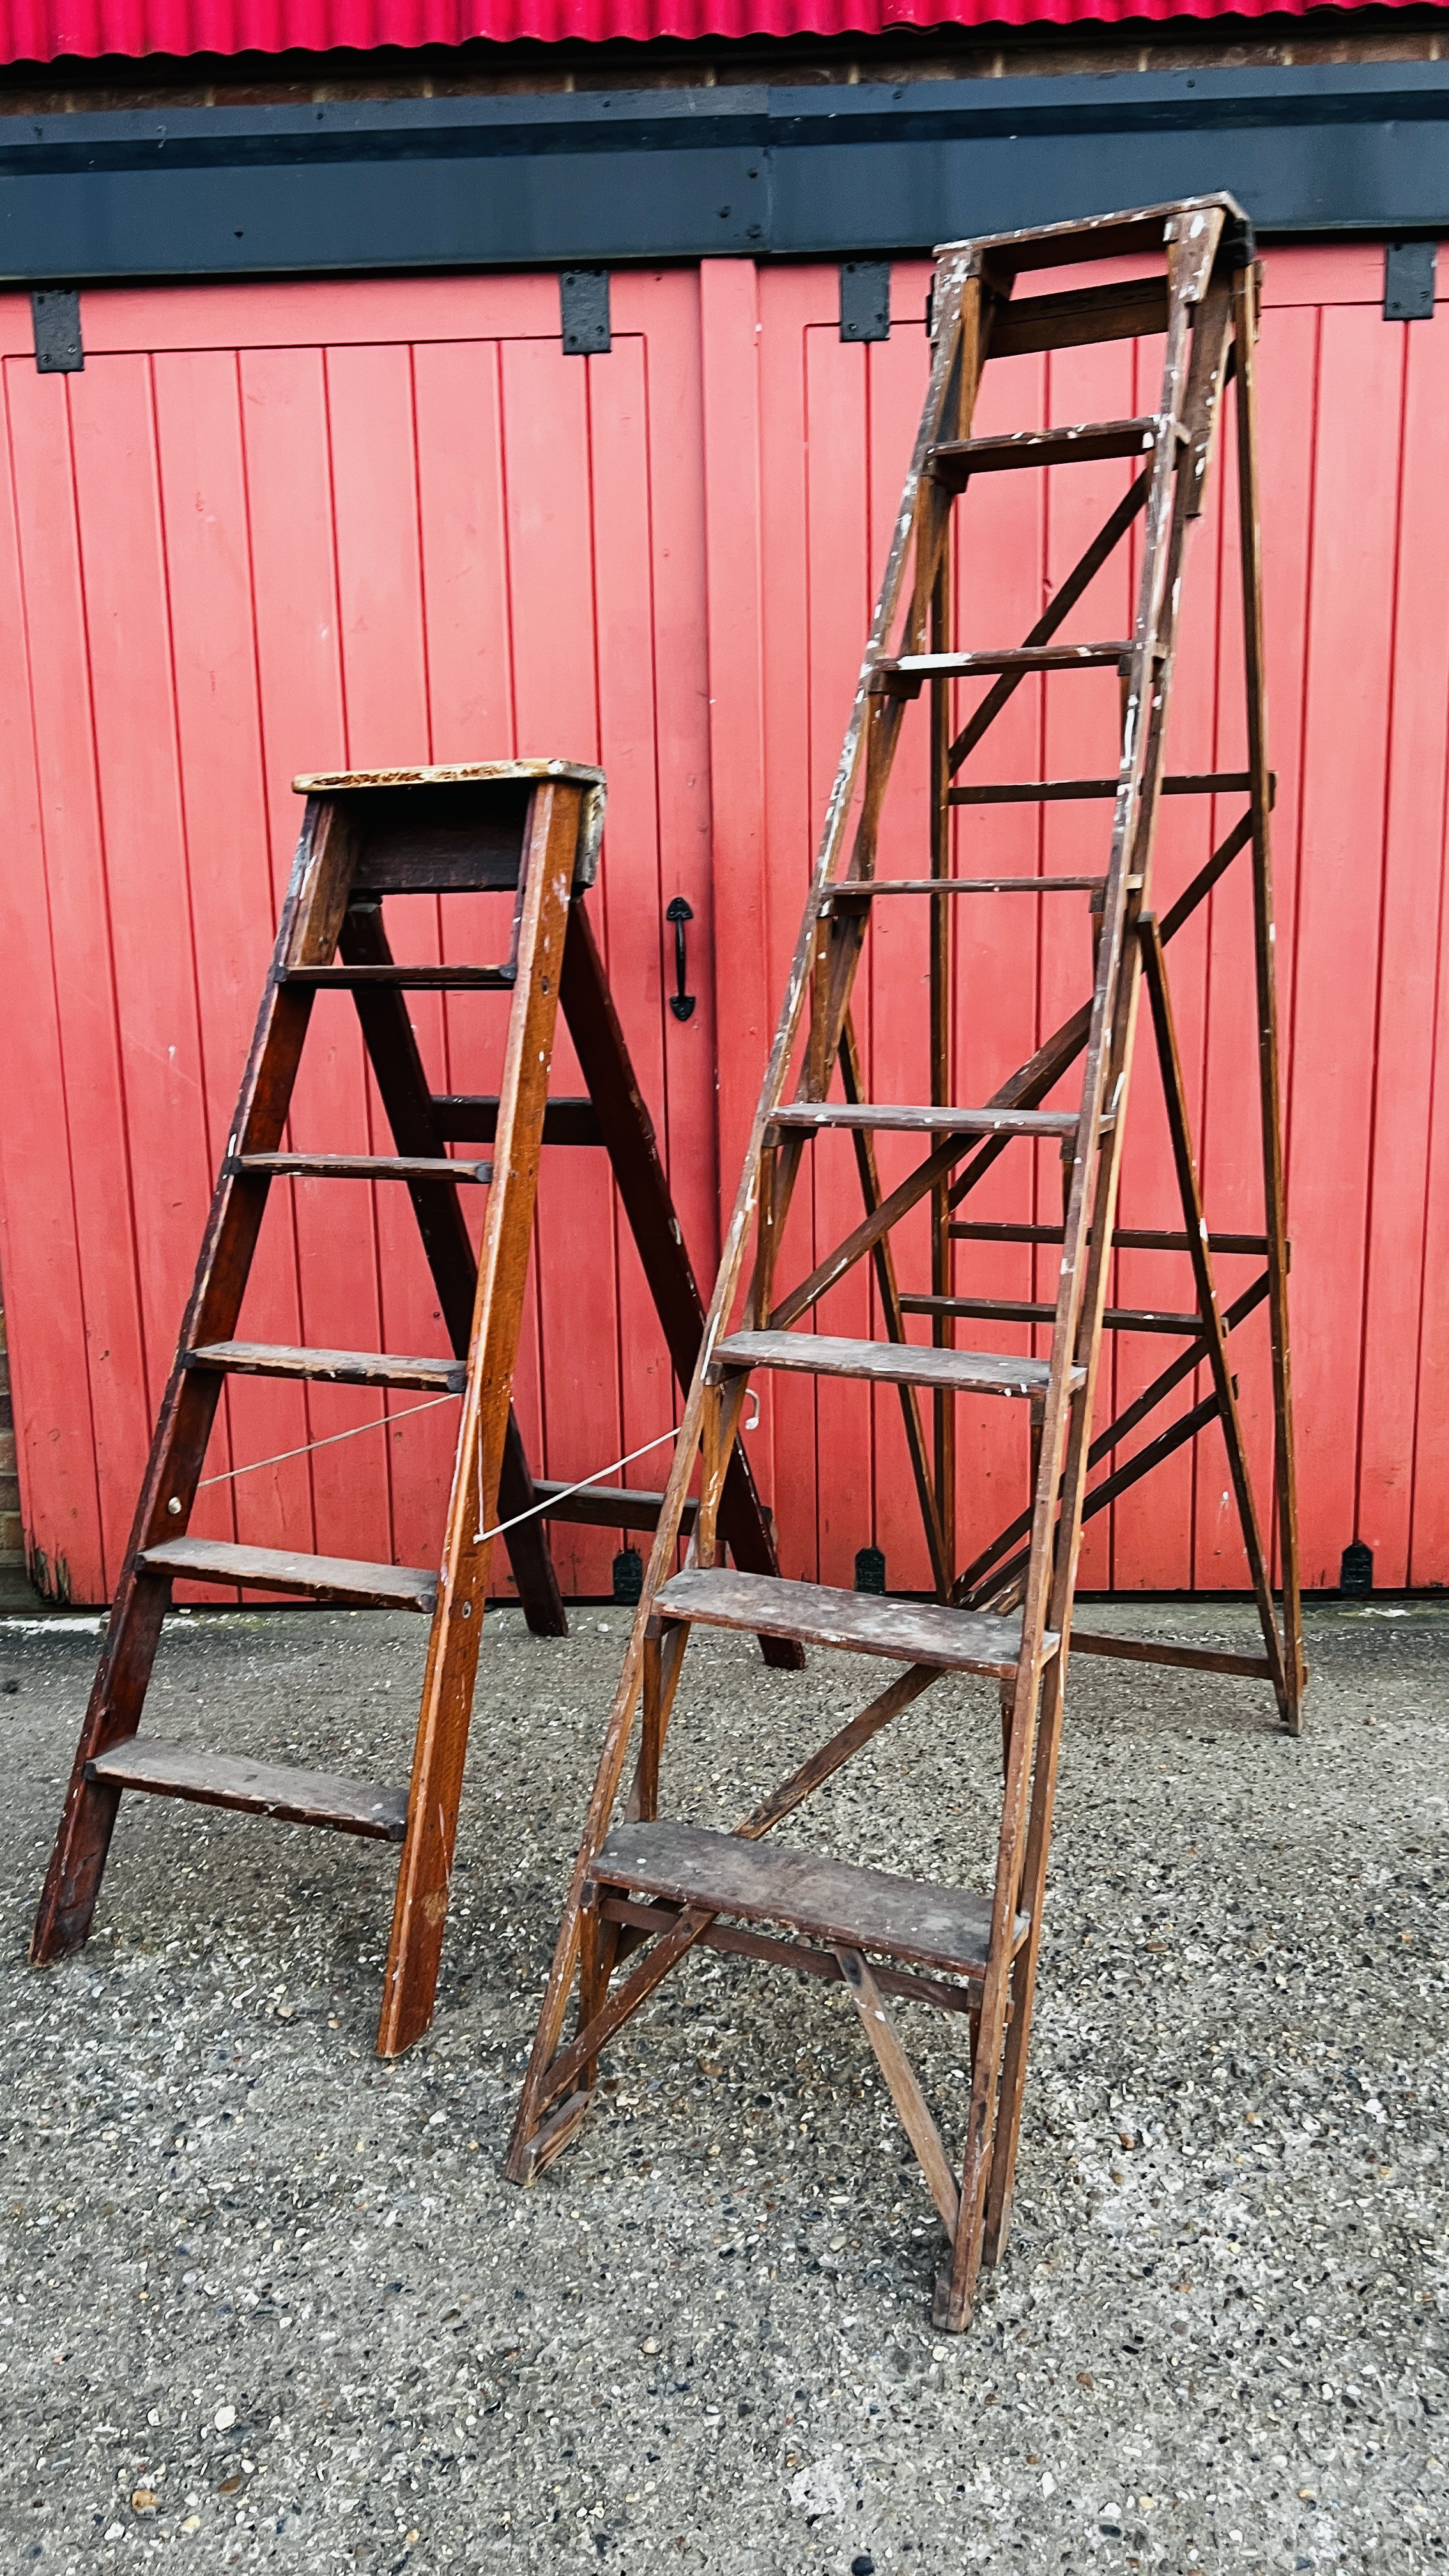 TWO SETS OF VINTAGE WOODEN LADDERS ONE HAVING A CAST PLAQUE TITLED "THE HATHERLEY" (COLLECTORS ITEM